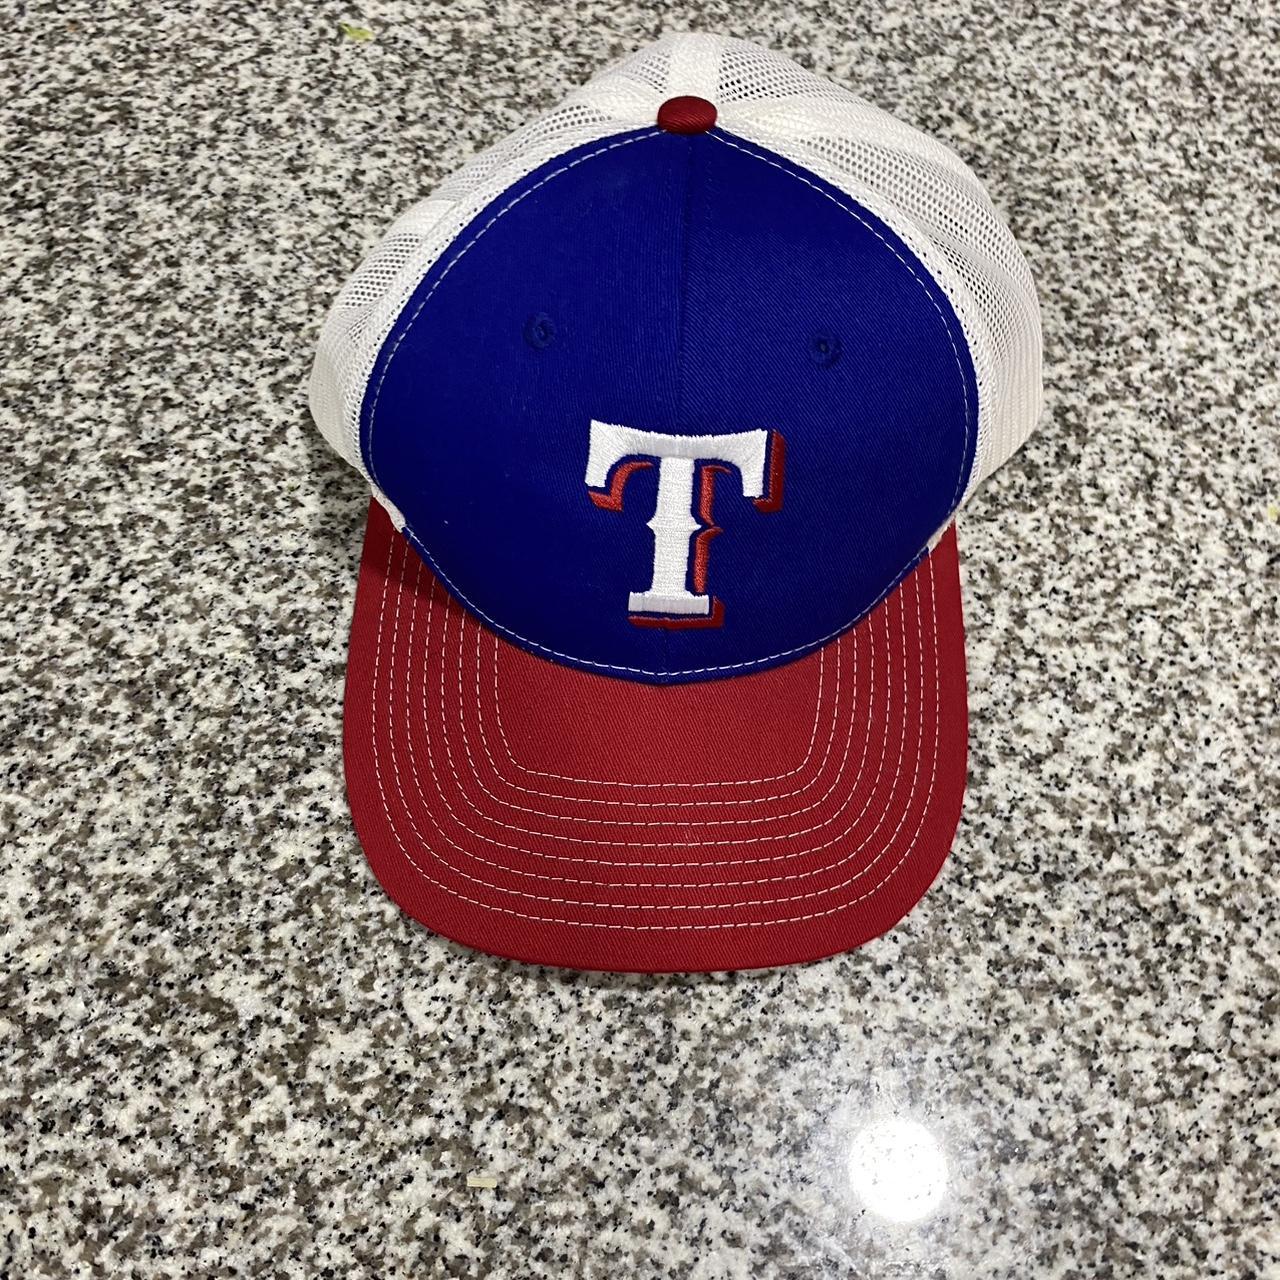 Texas Rangers Hats  Curbside Pickup Available at DICK'S